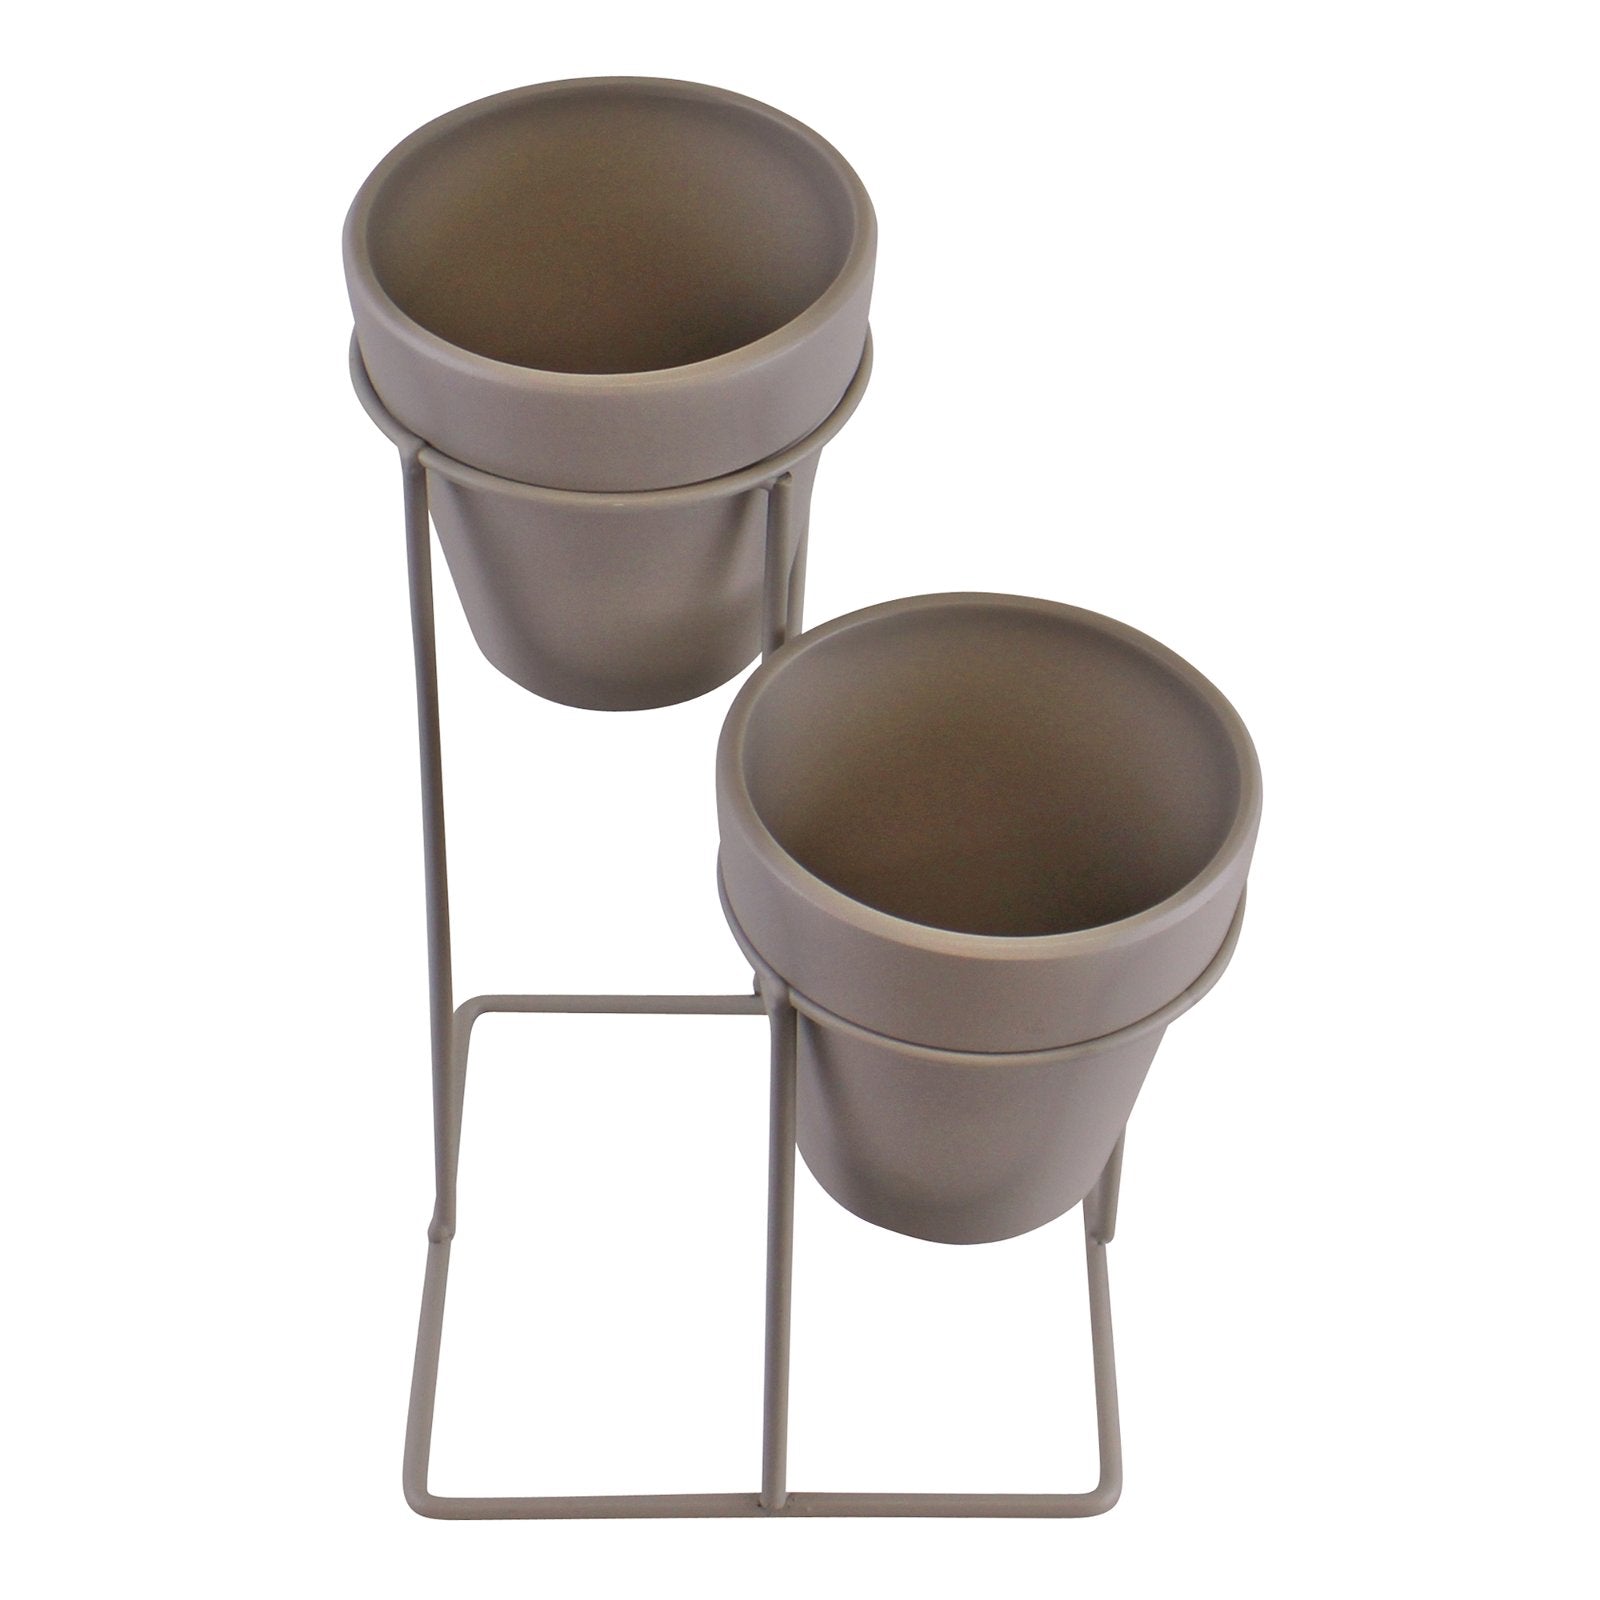 Potting Shed Small Double Planter On Stand, Grey - Kaftan direct